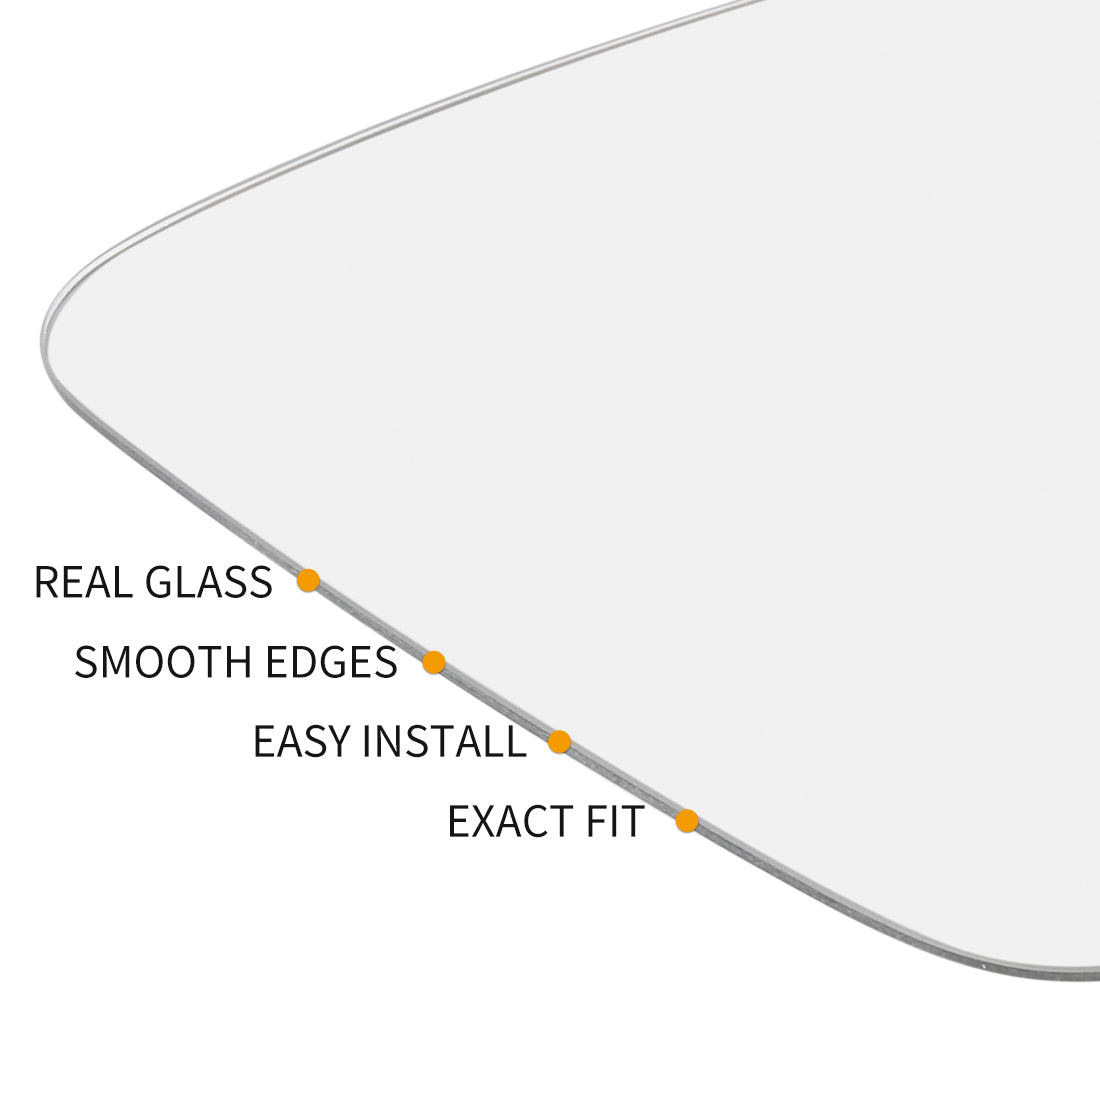 X AUTOHAUX Passenger Right Side Rearview Replacement Mirror Glass W/ Adhesive for VOLVO S60 S80 V70 2001-2006